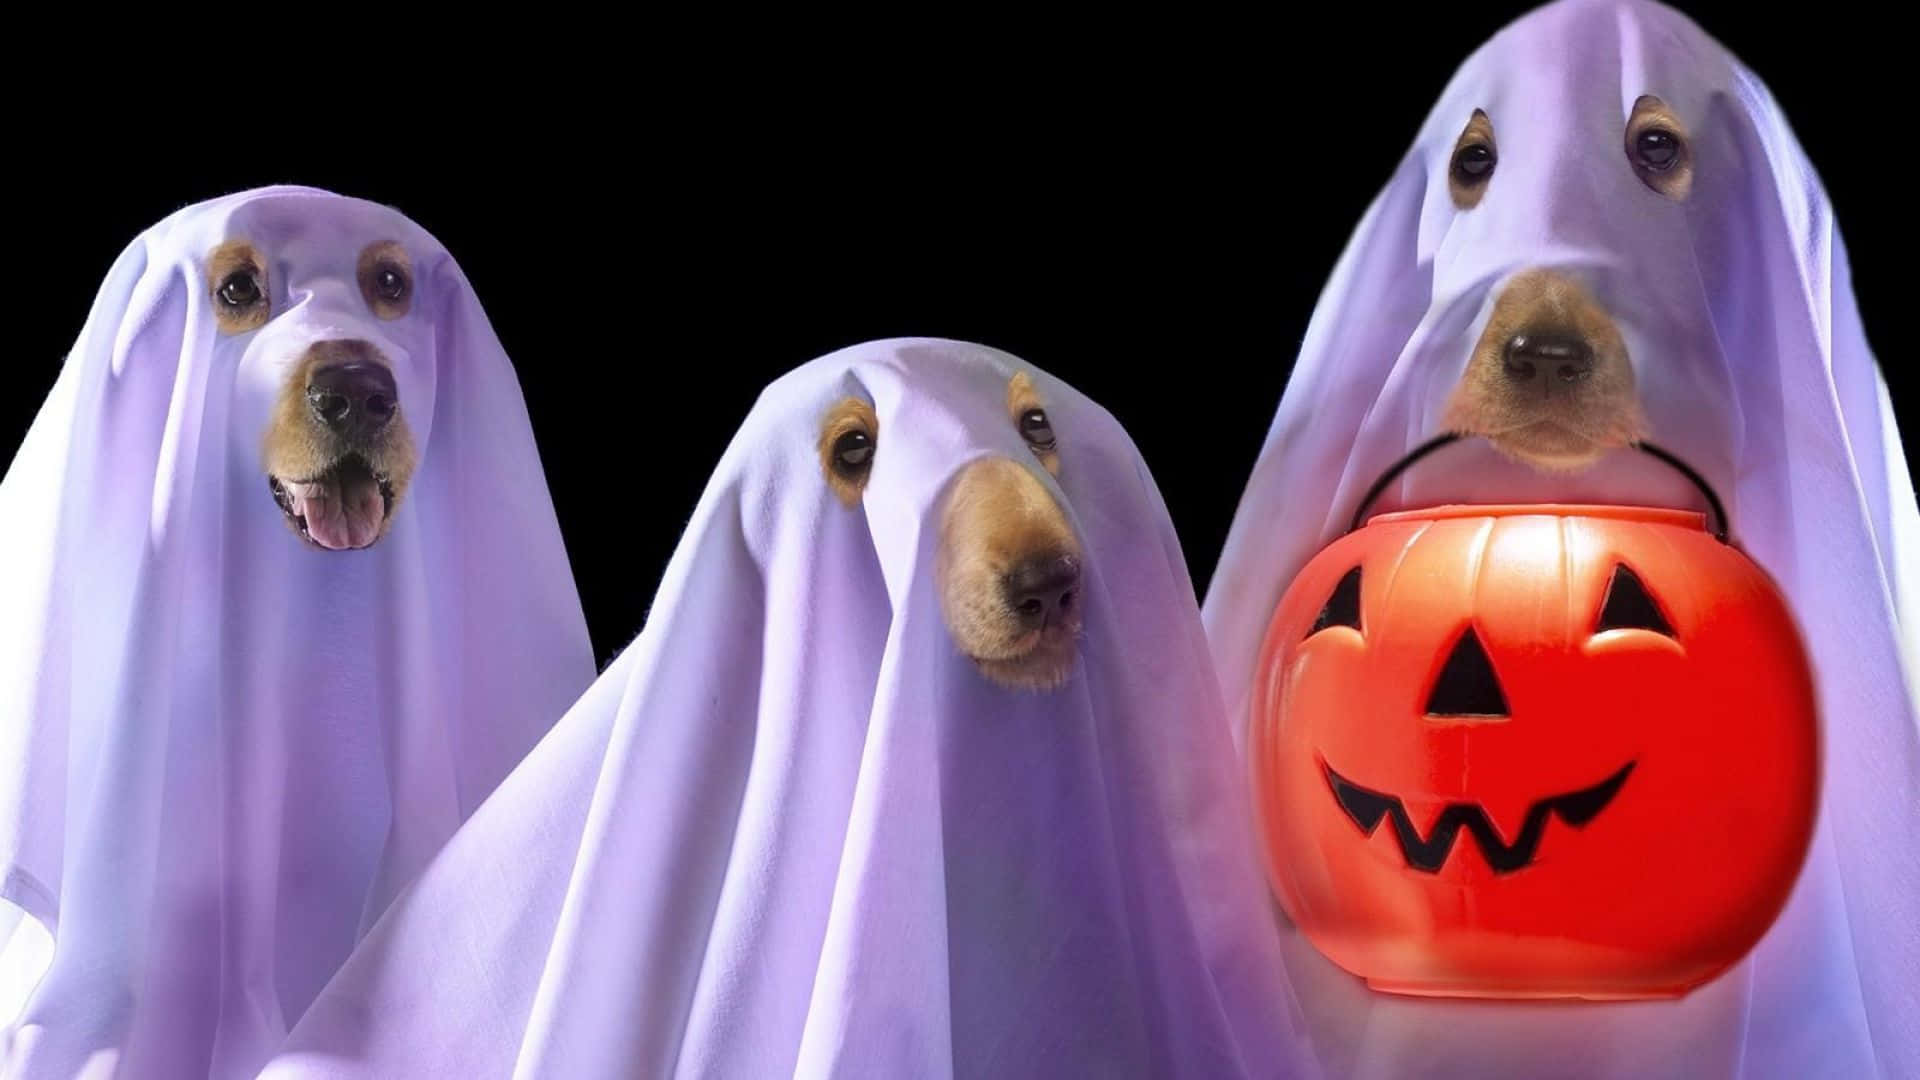 Keep your pet festive this Halloween with a one-of-a-kind Halloween costume! Wallpaper